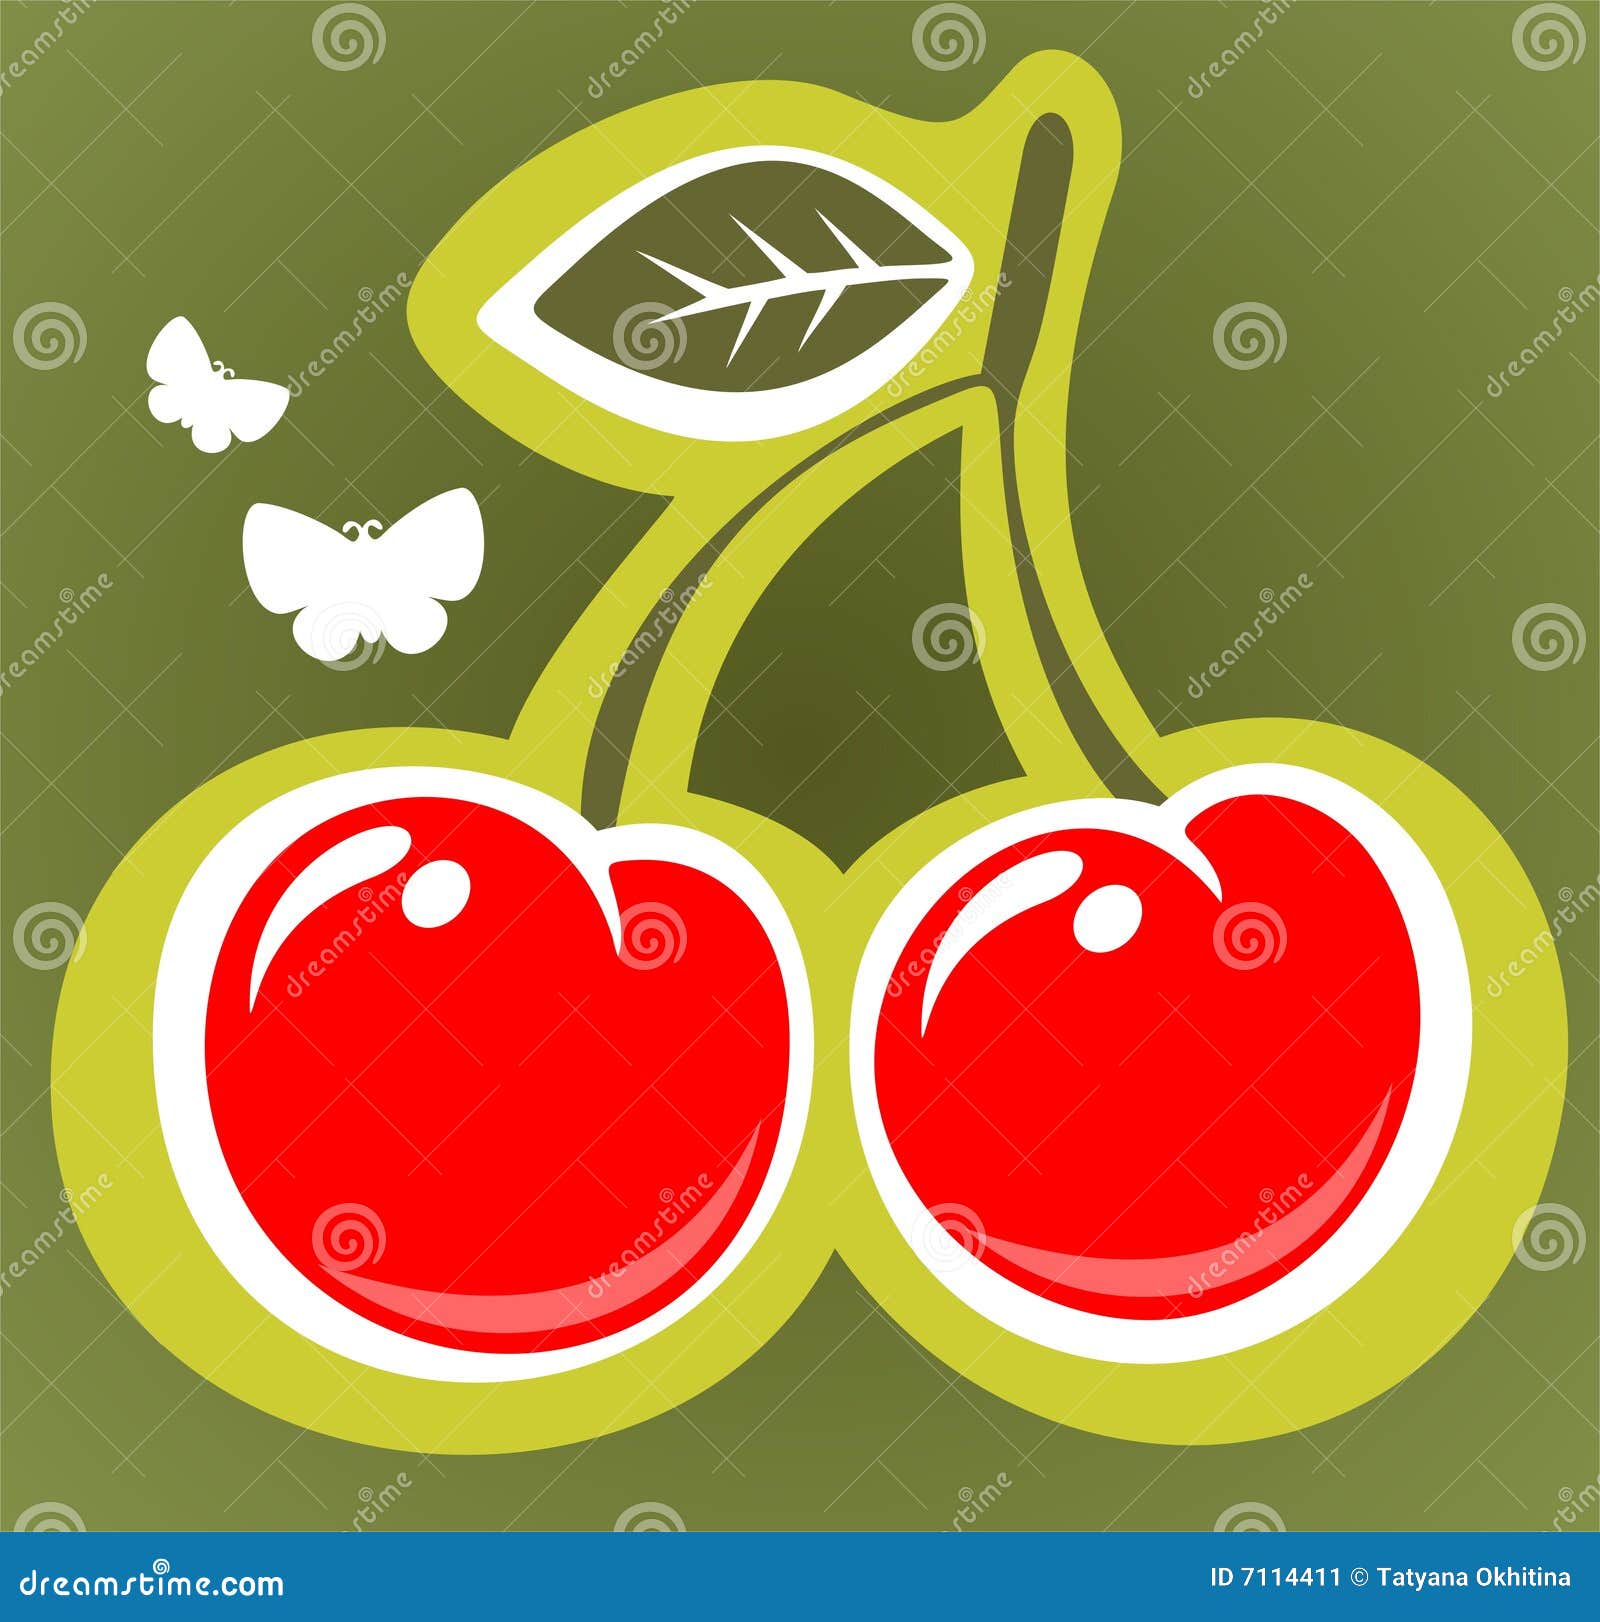 Cherry stock vector. Illustration of graphic, artistic - 7114411